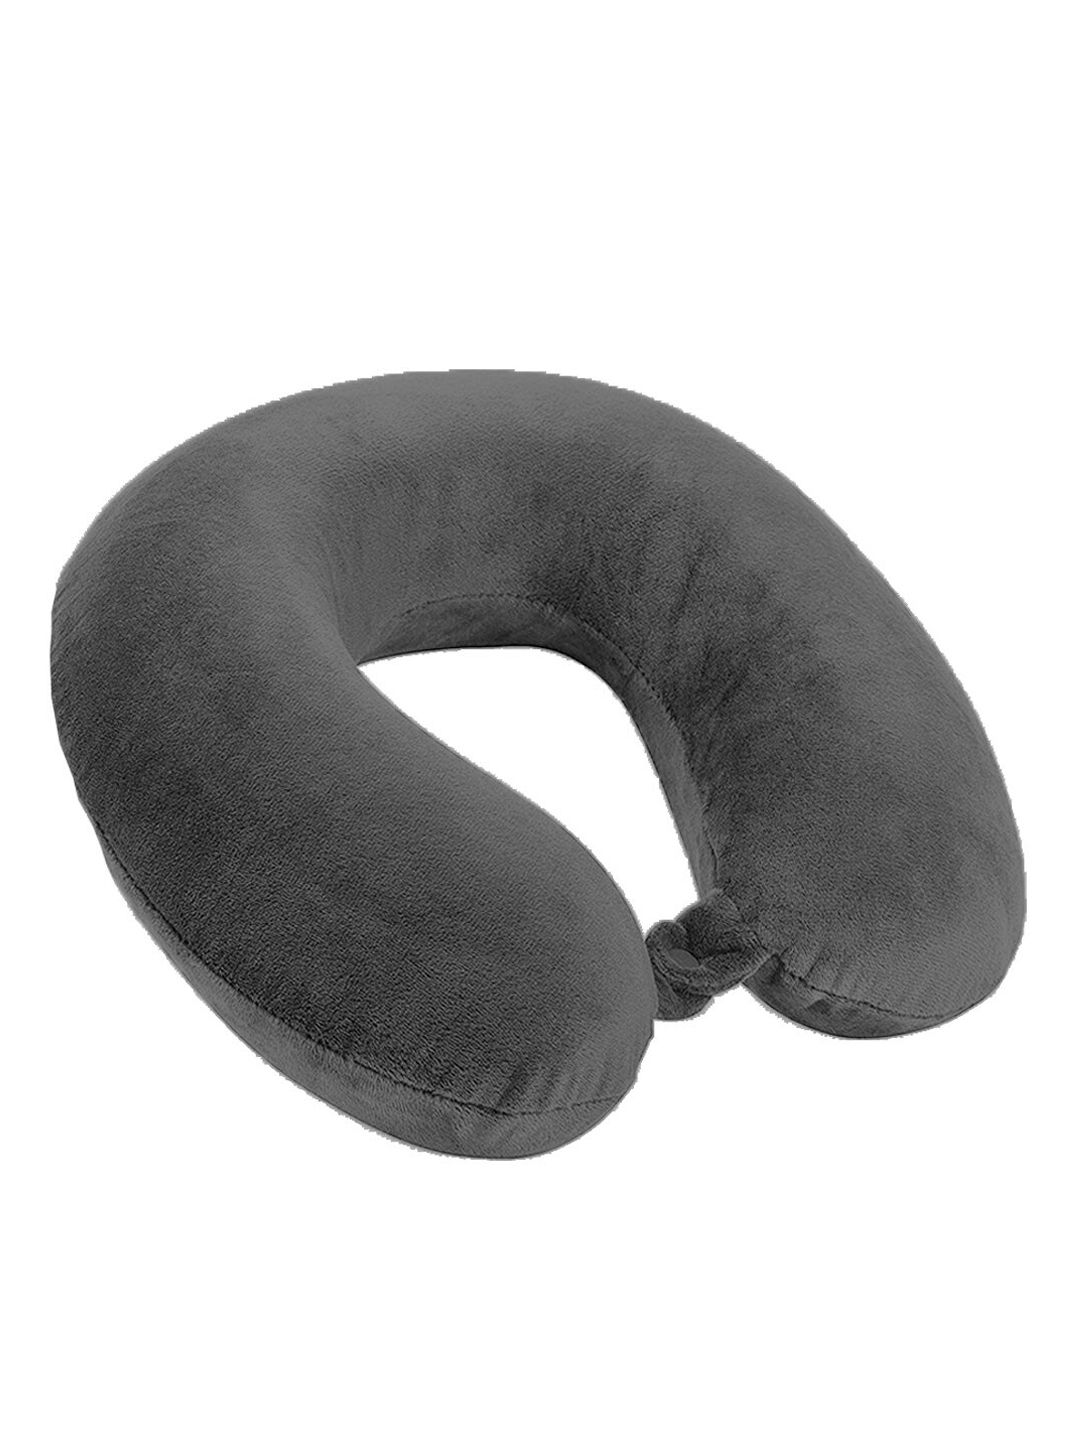 Lushomes Grey Solid Travel Pillow Price in India